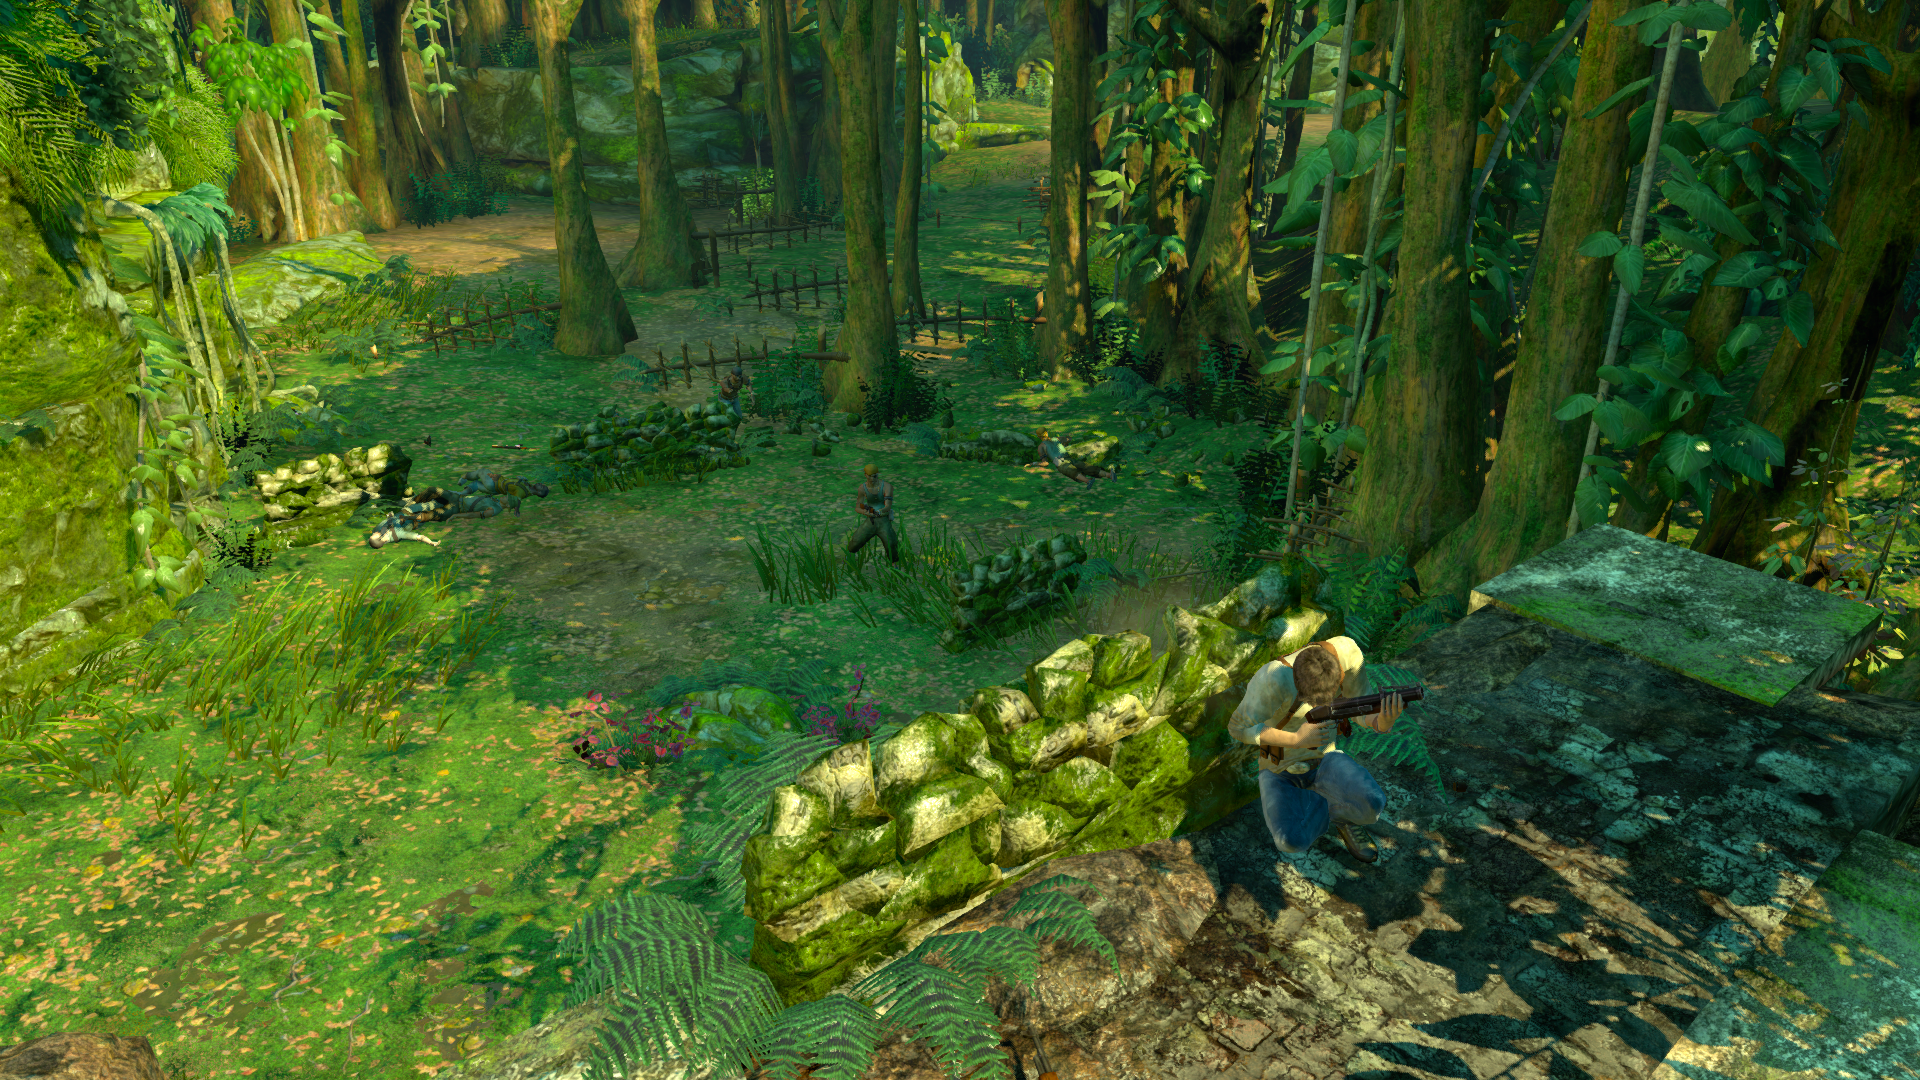 Plane-wrecked” treasure locations – Uncharted: Drake's Fortune